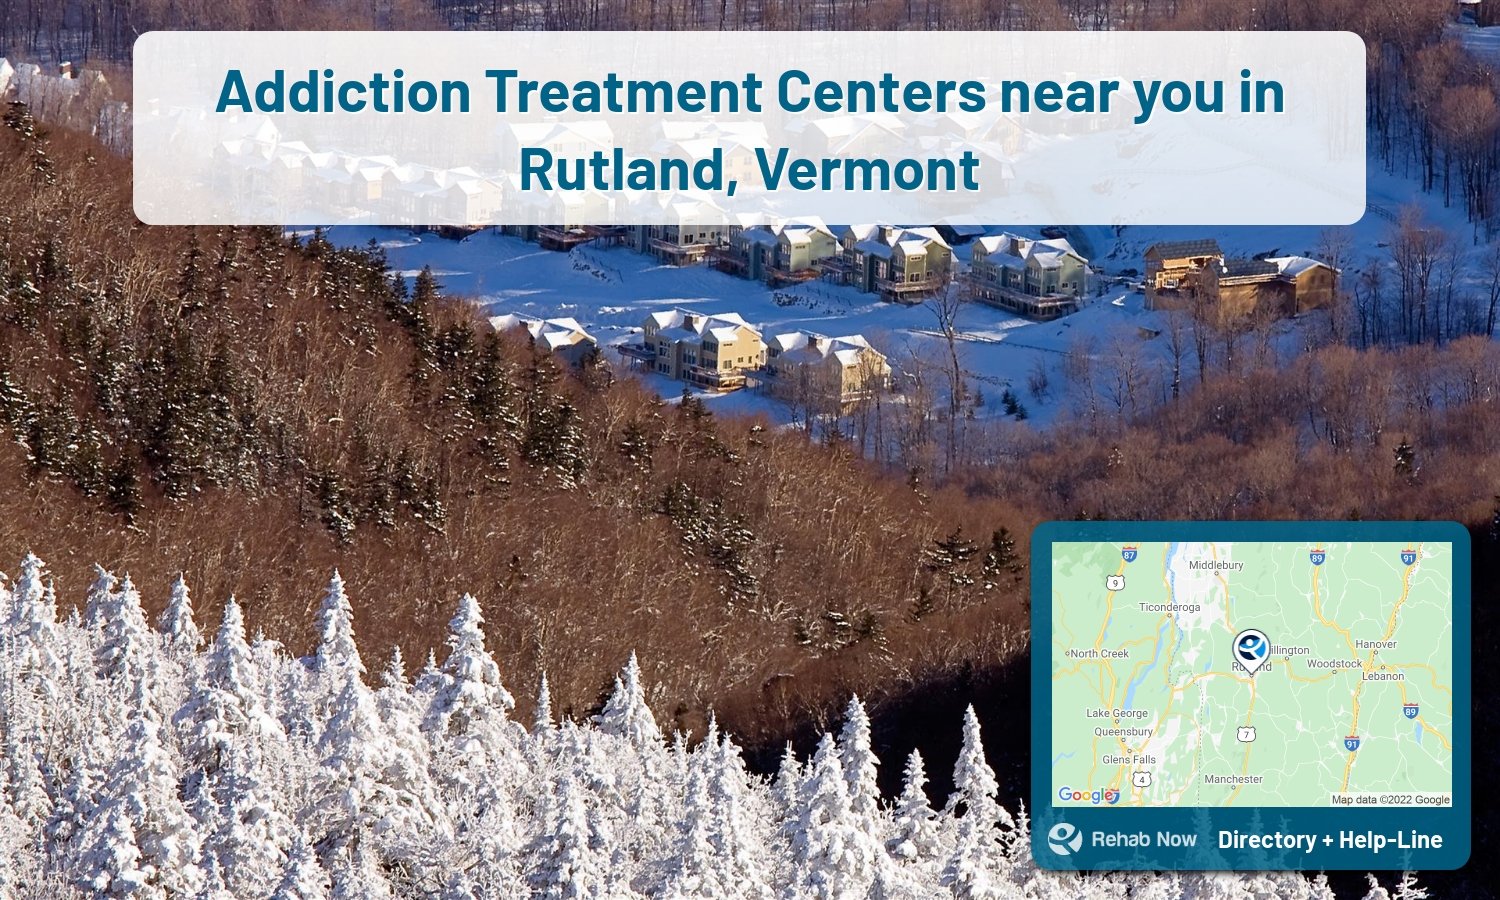 View options, availability, treatment methods, and more, for drug rehab and alcohol treatment in Rutland, Vermont